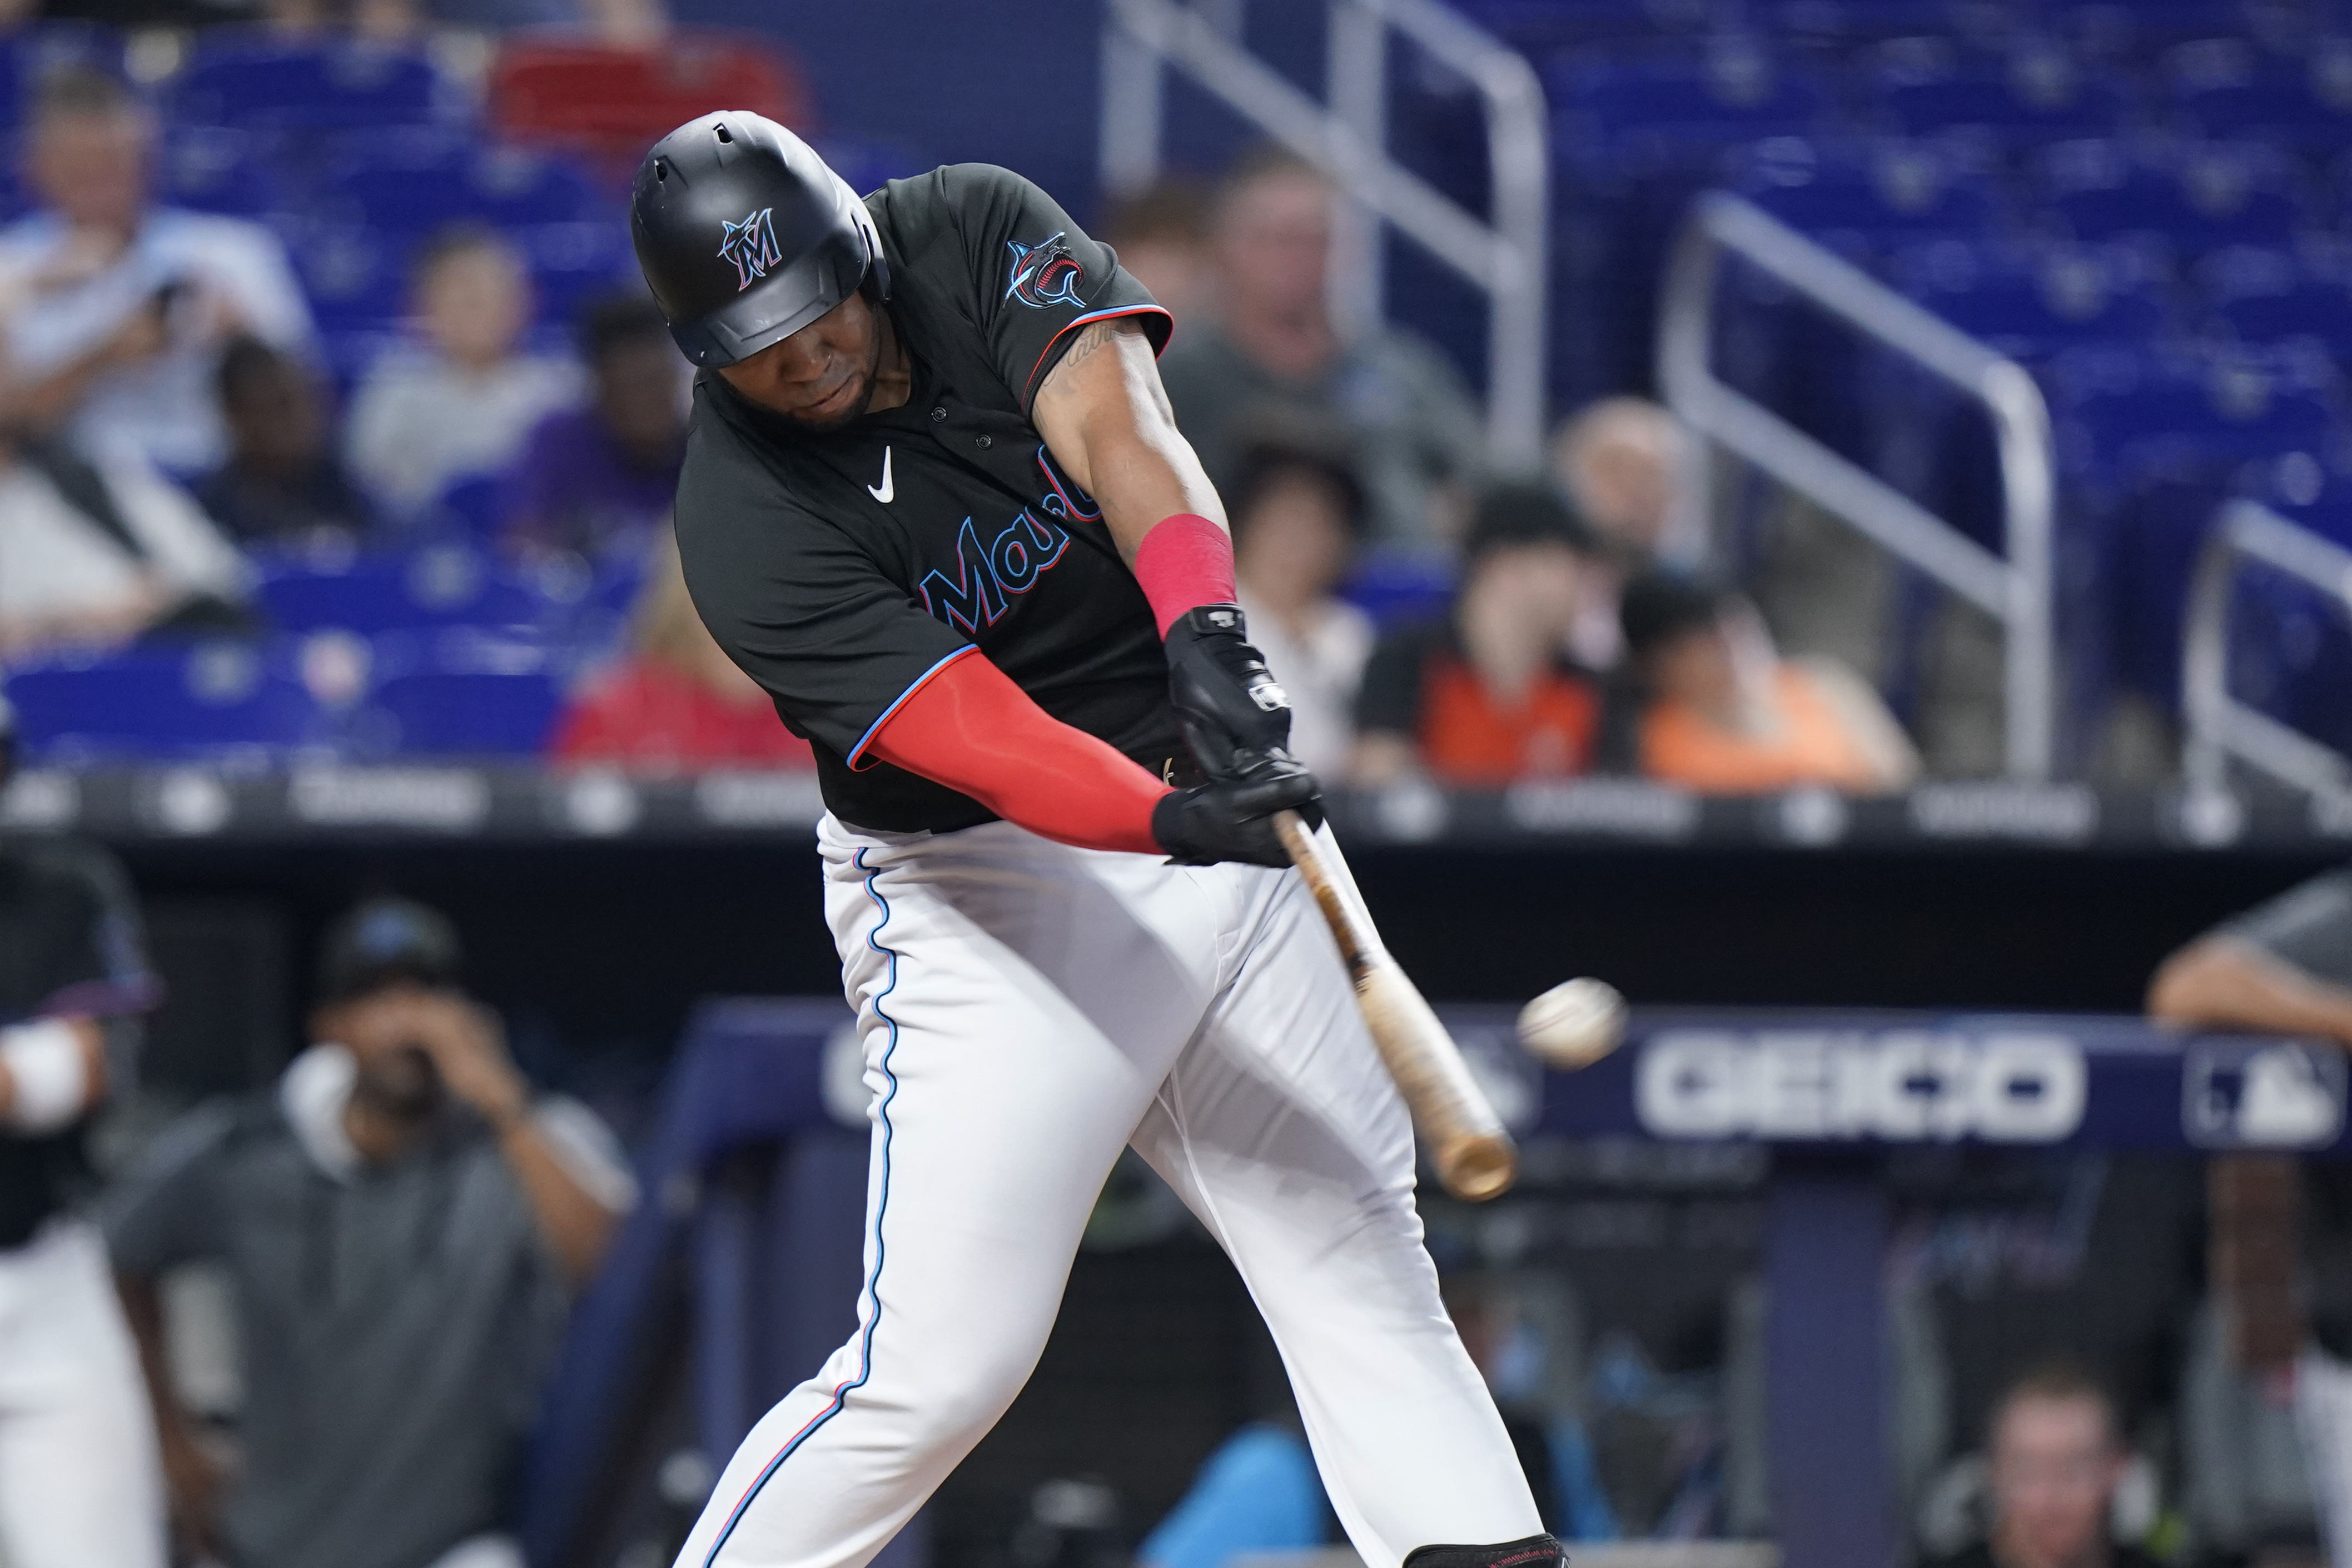 Contreras homers twice as Acuña, Braves beat Marlins 4-3